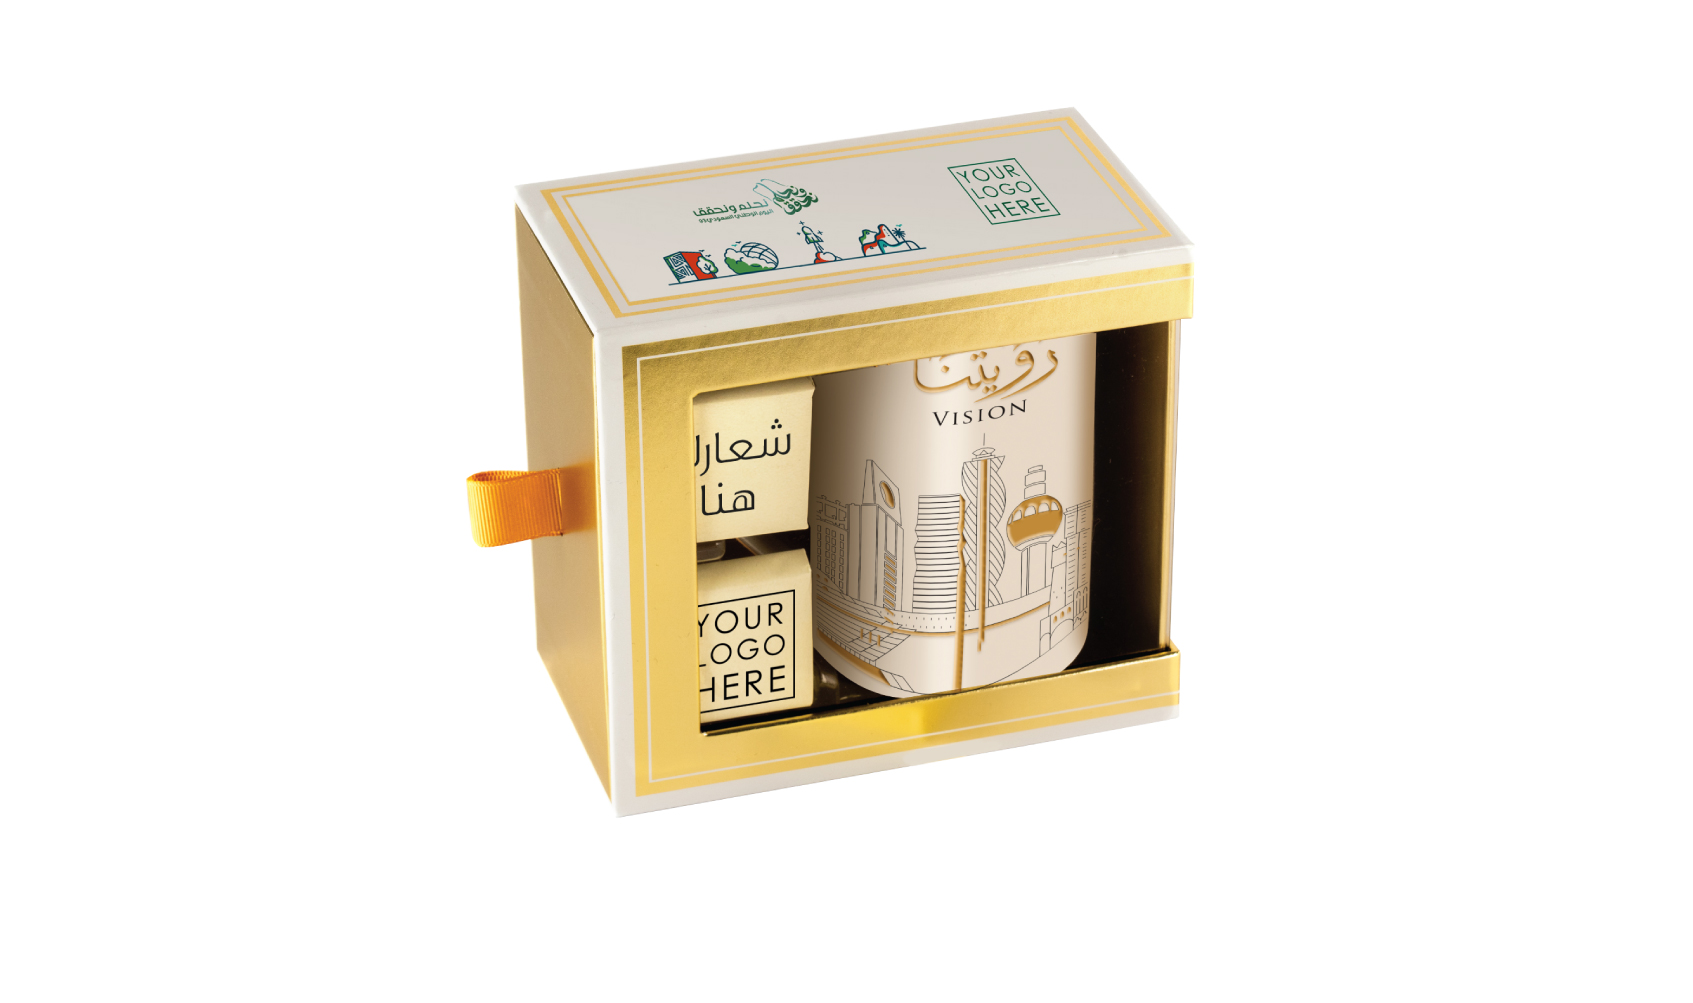 Our Vision Big Mug In A Gold Box